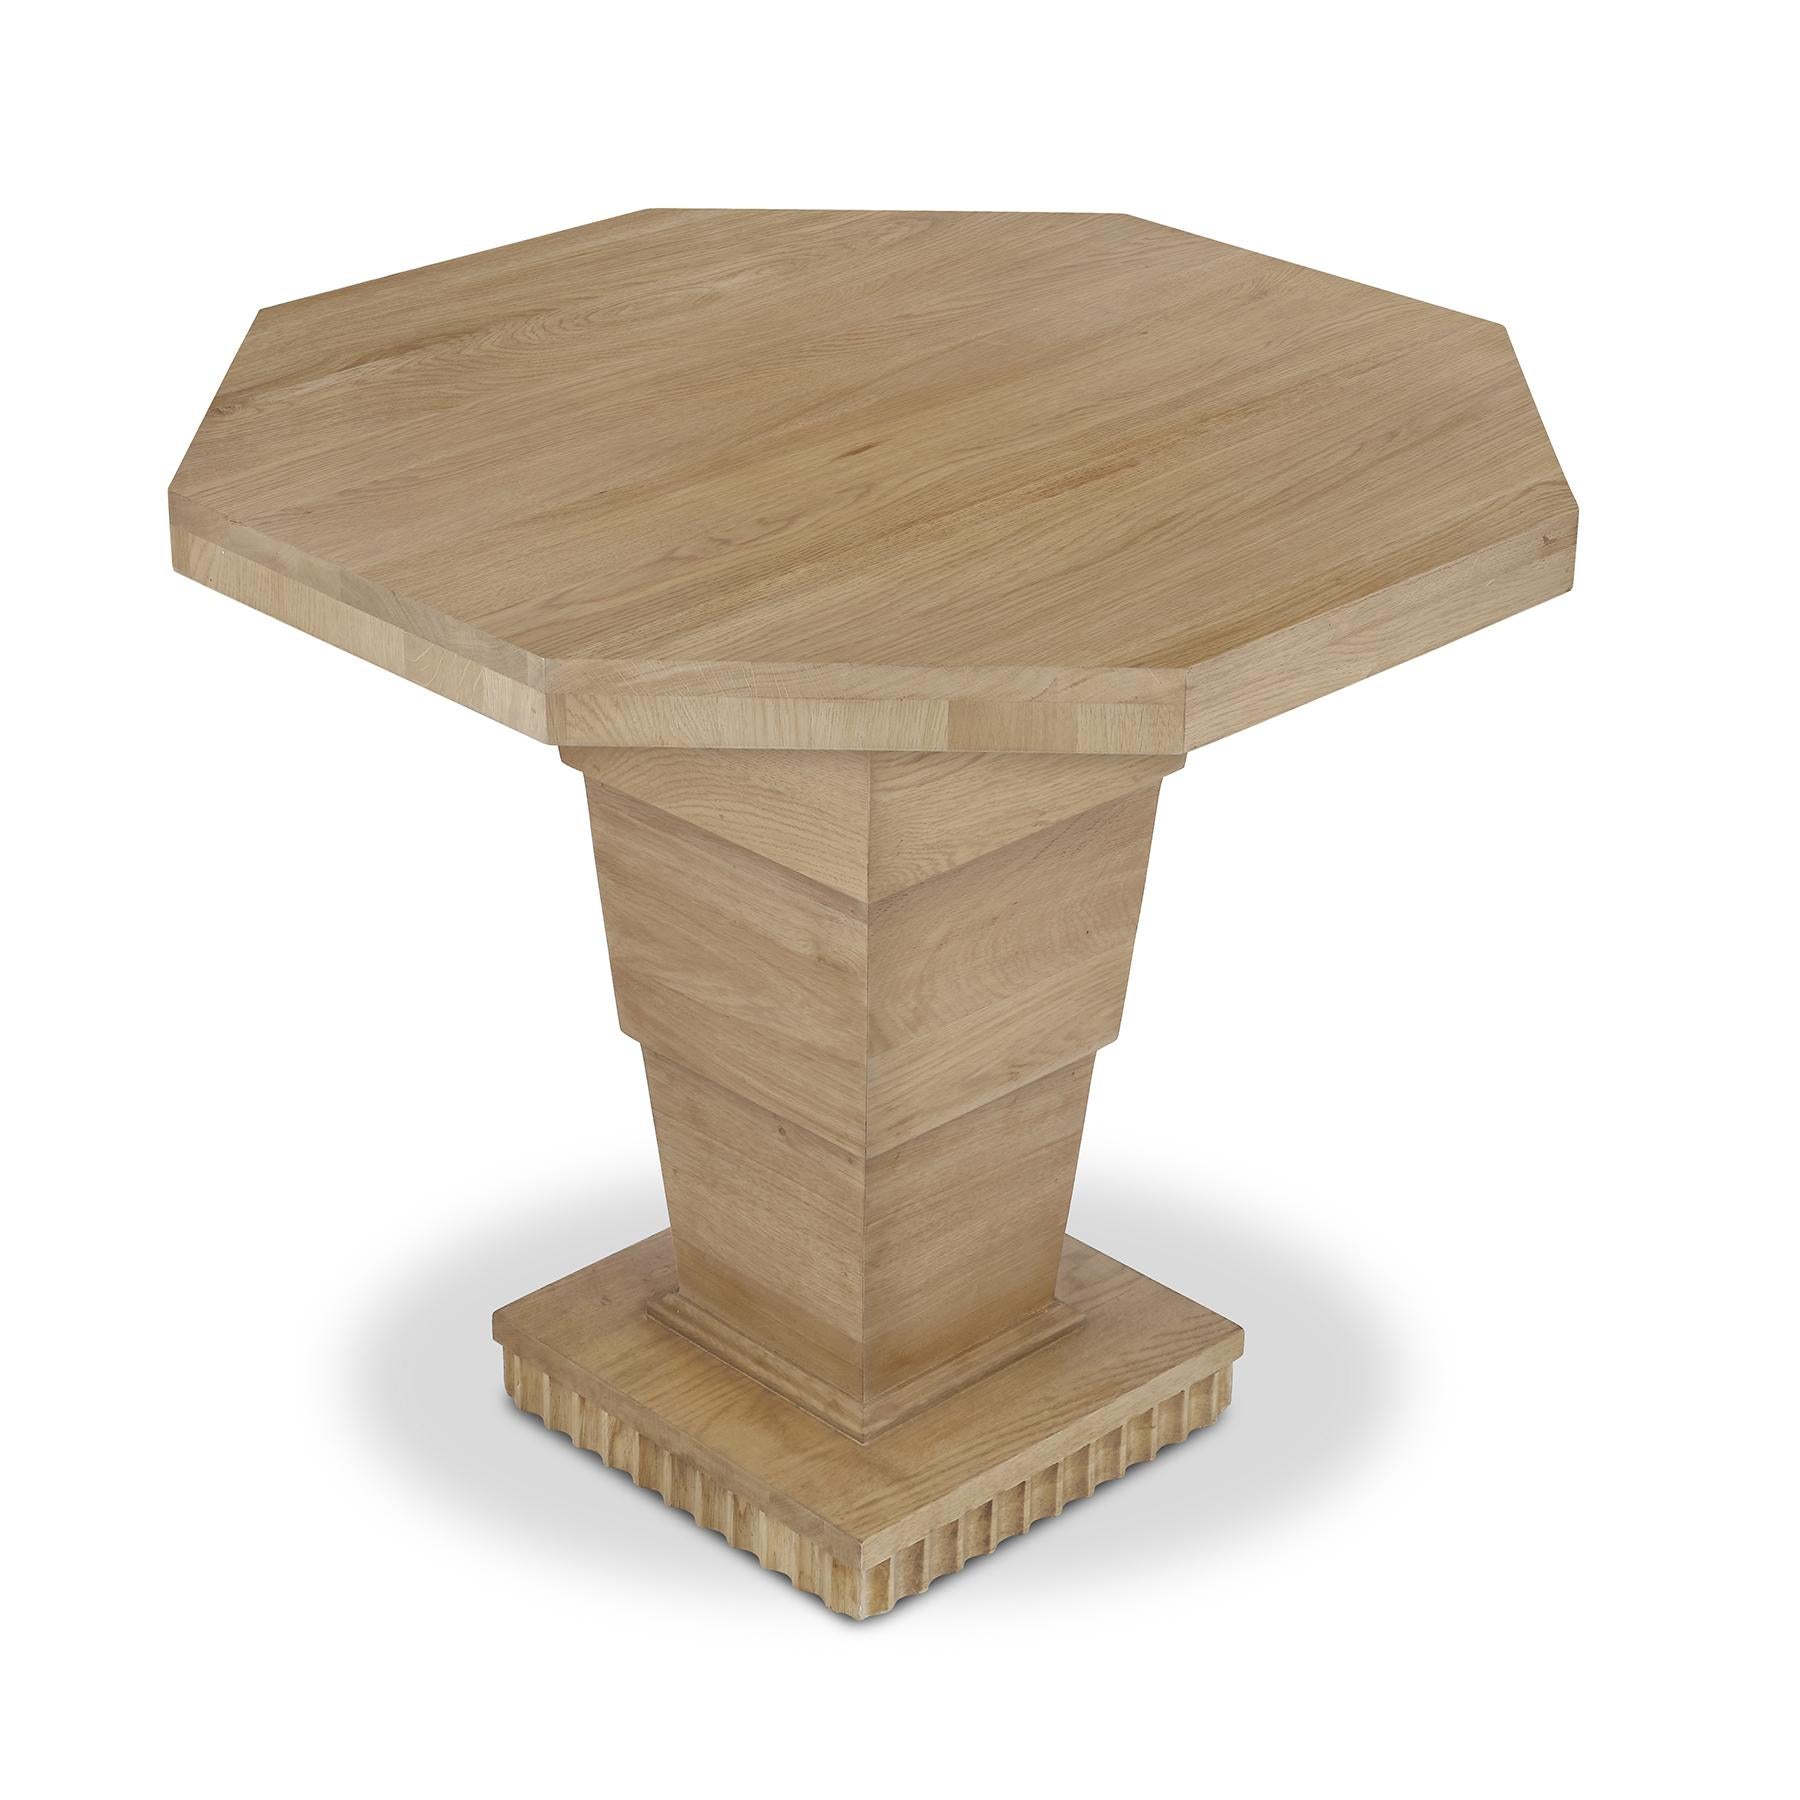 A reassuringly solid side table, generously scaled for helping to anchor sofas and chairs alike, made of warm oak, features a practical octagonal shaped top, supported by a stepped pedestal atop a fluted base.
